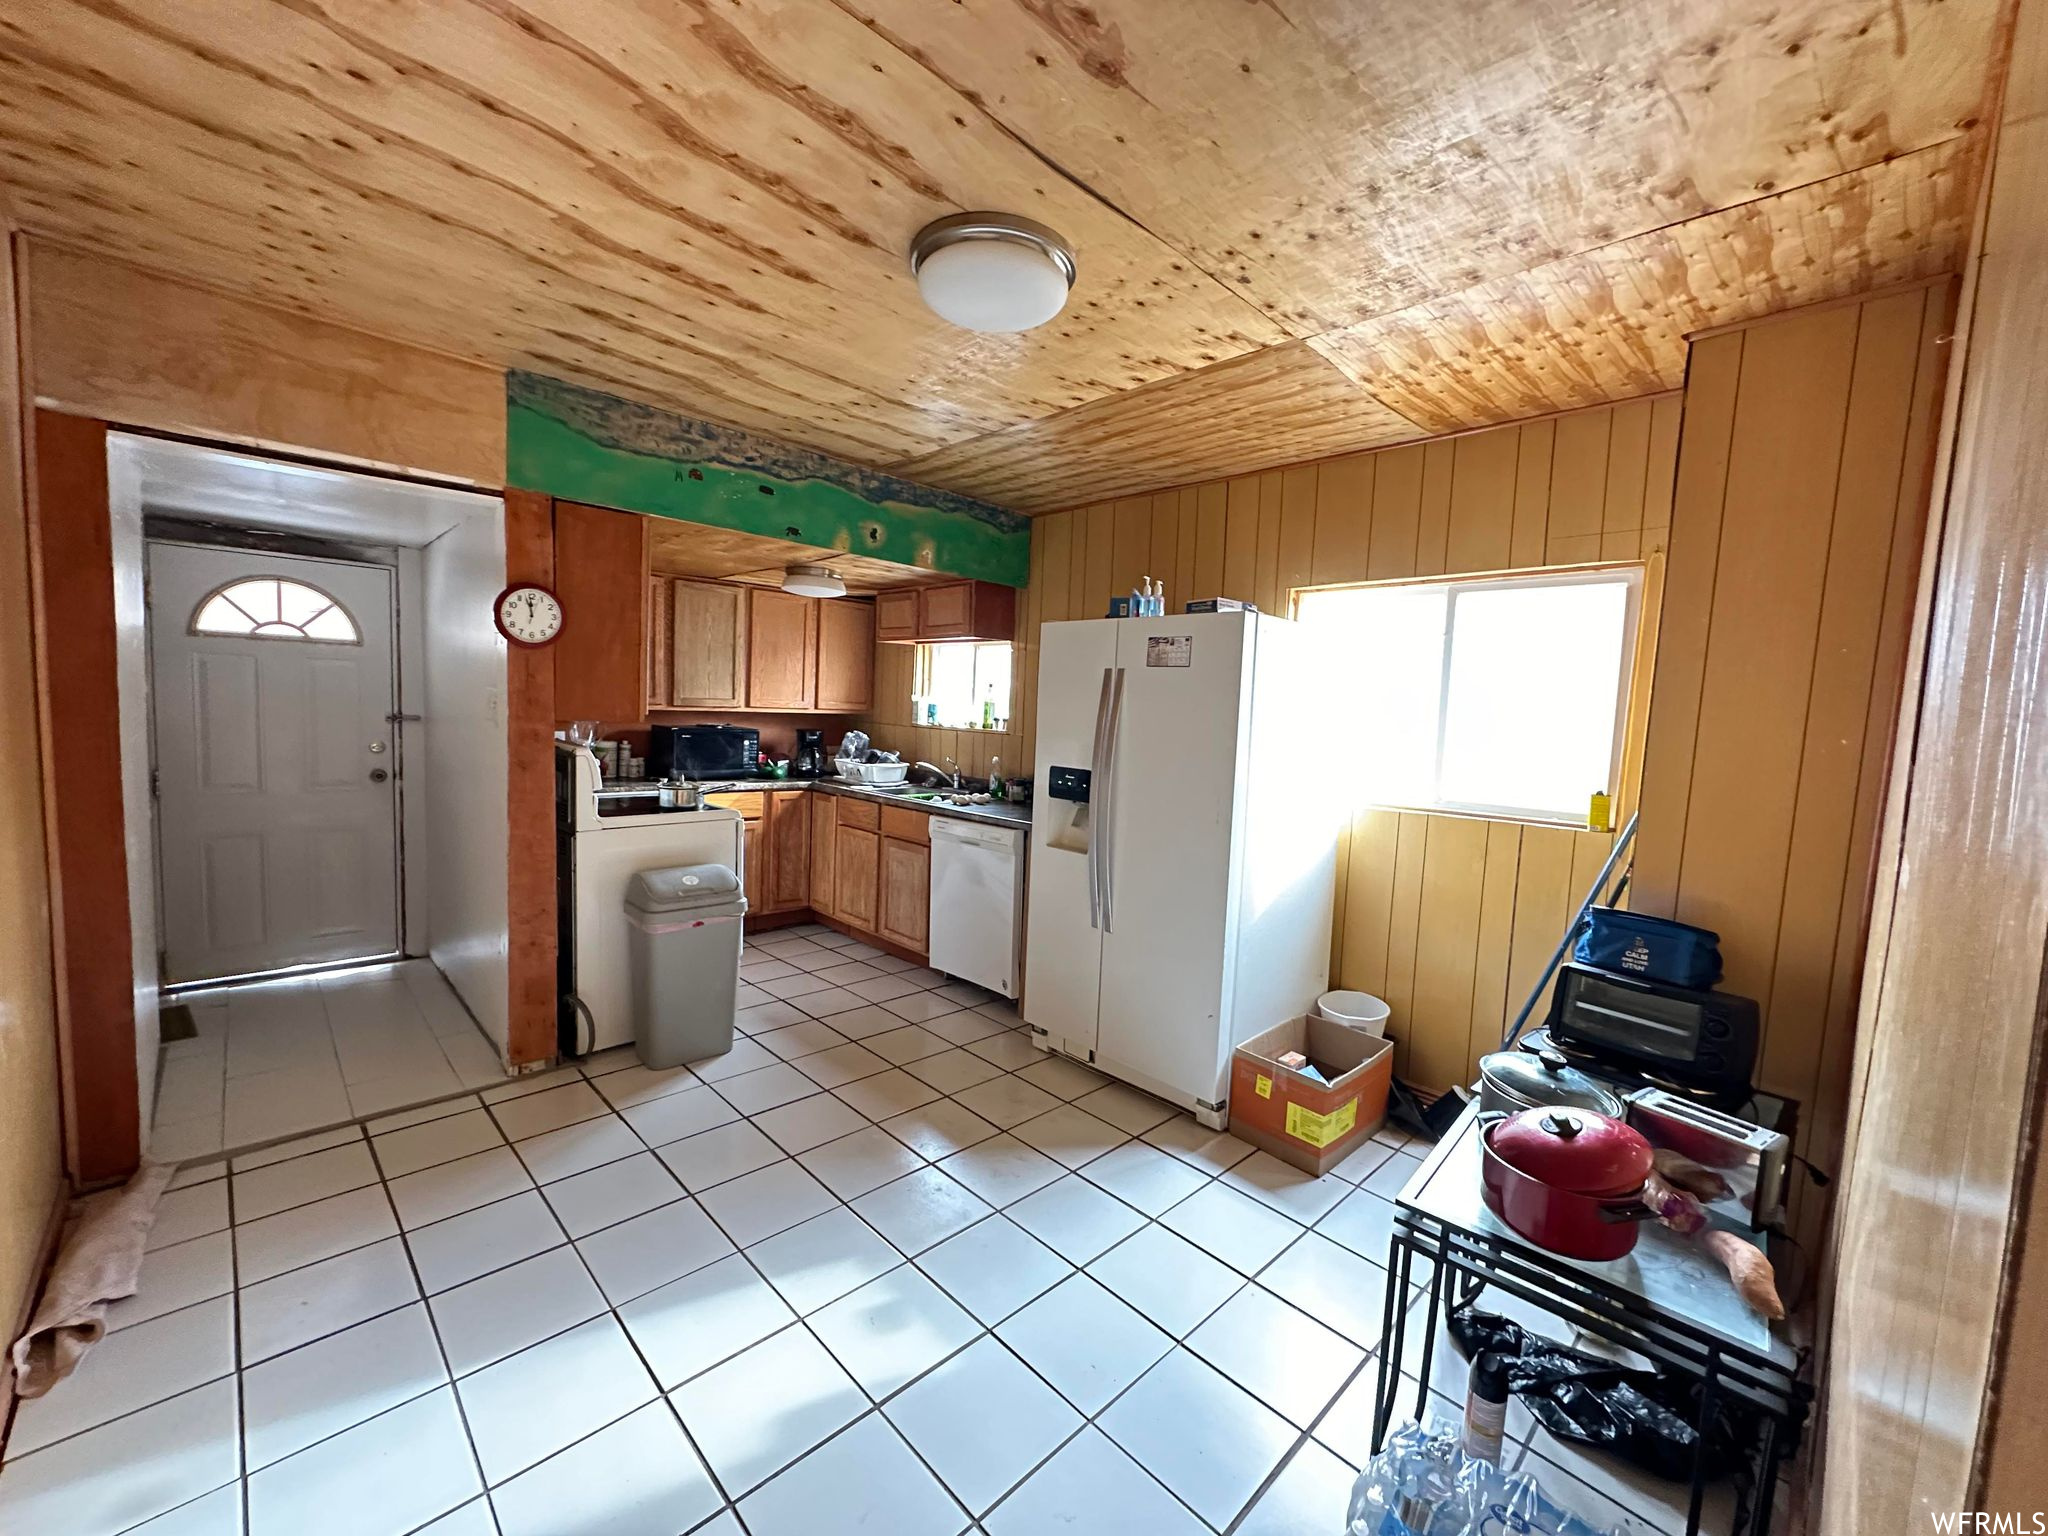 Kitchen with light tile floors, wooden ceiling, white appliances, and plenty of natural light